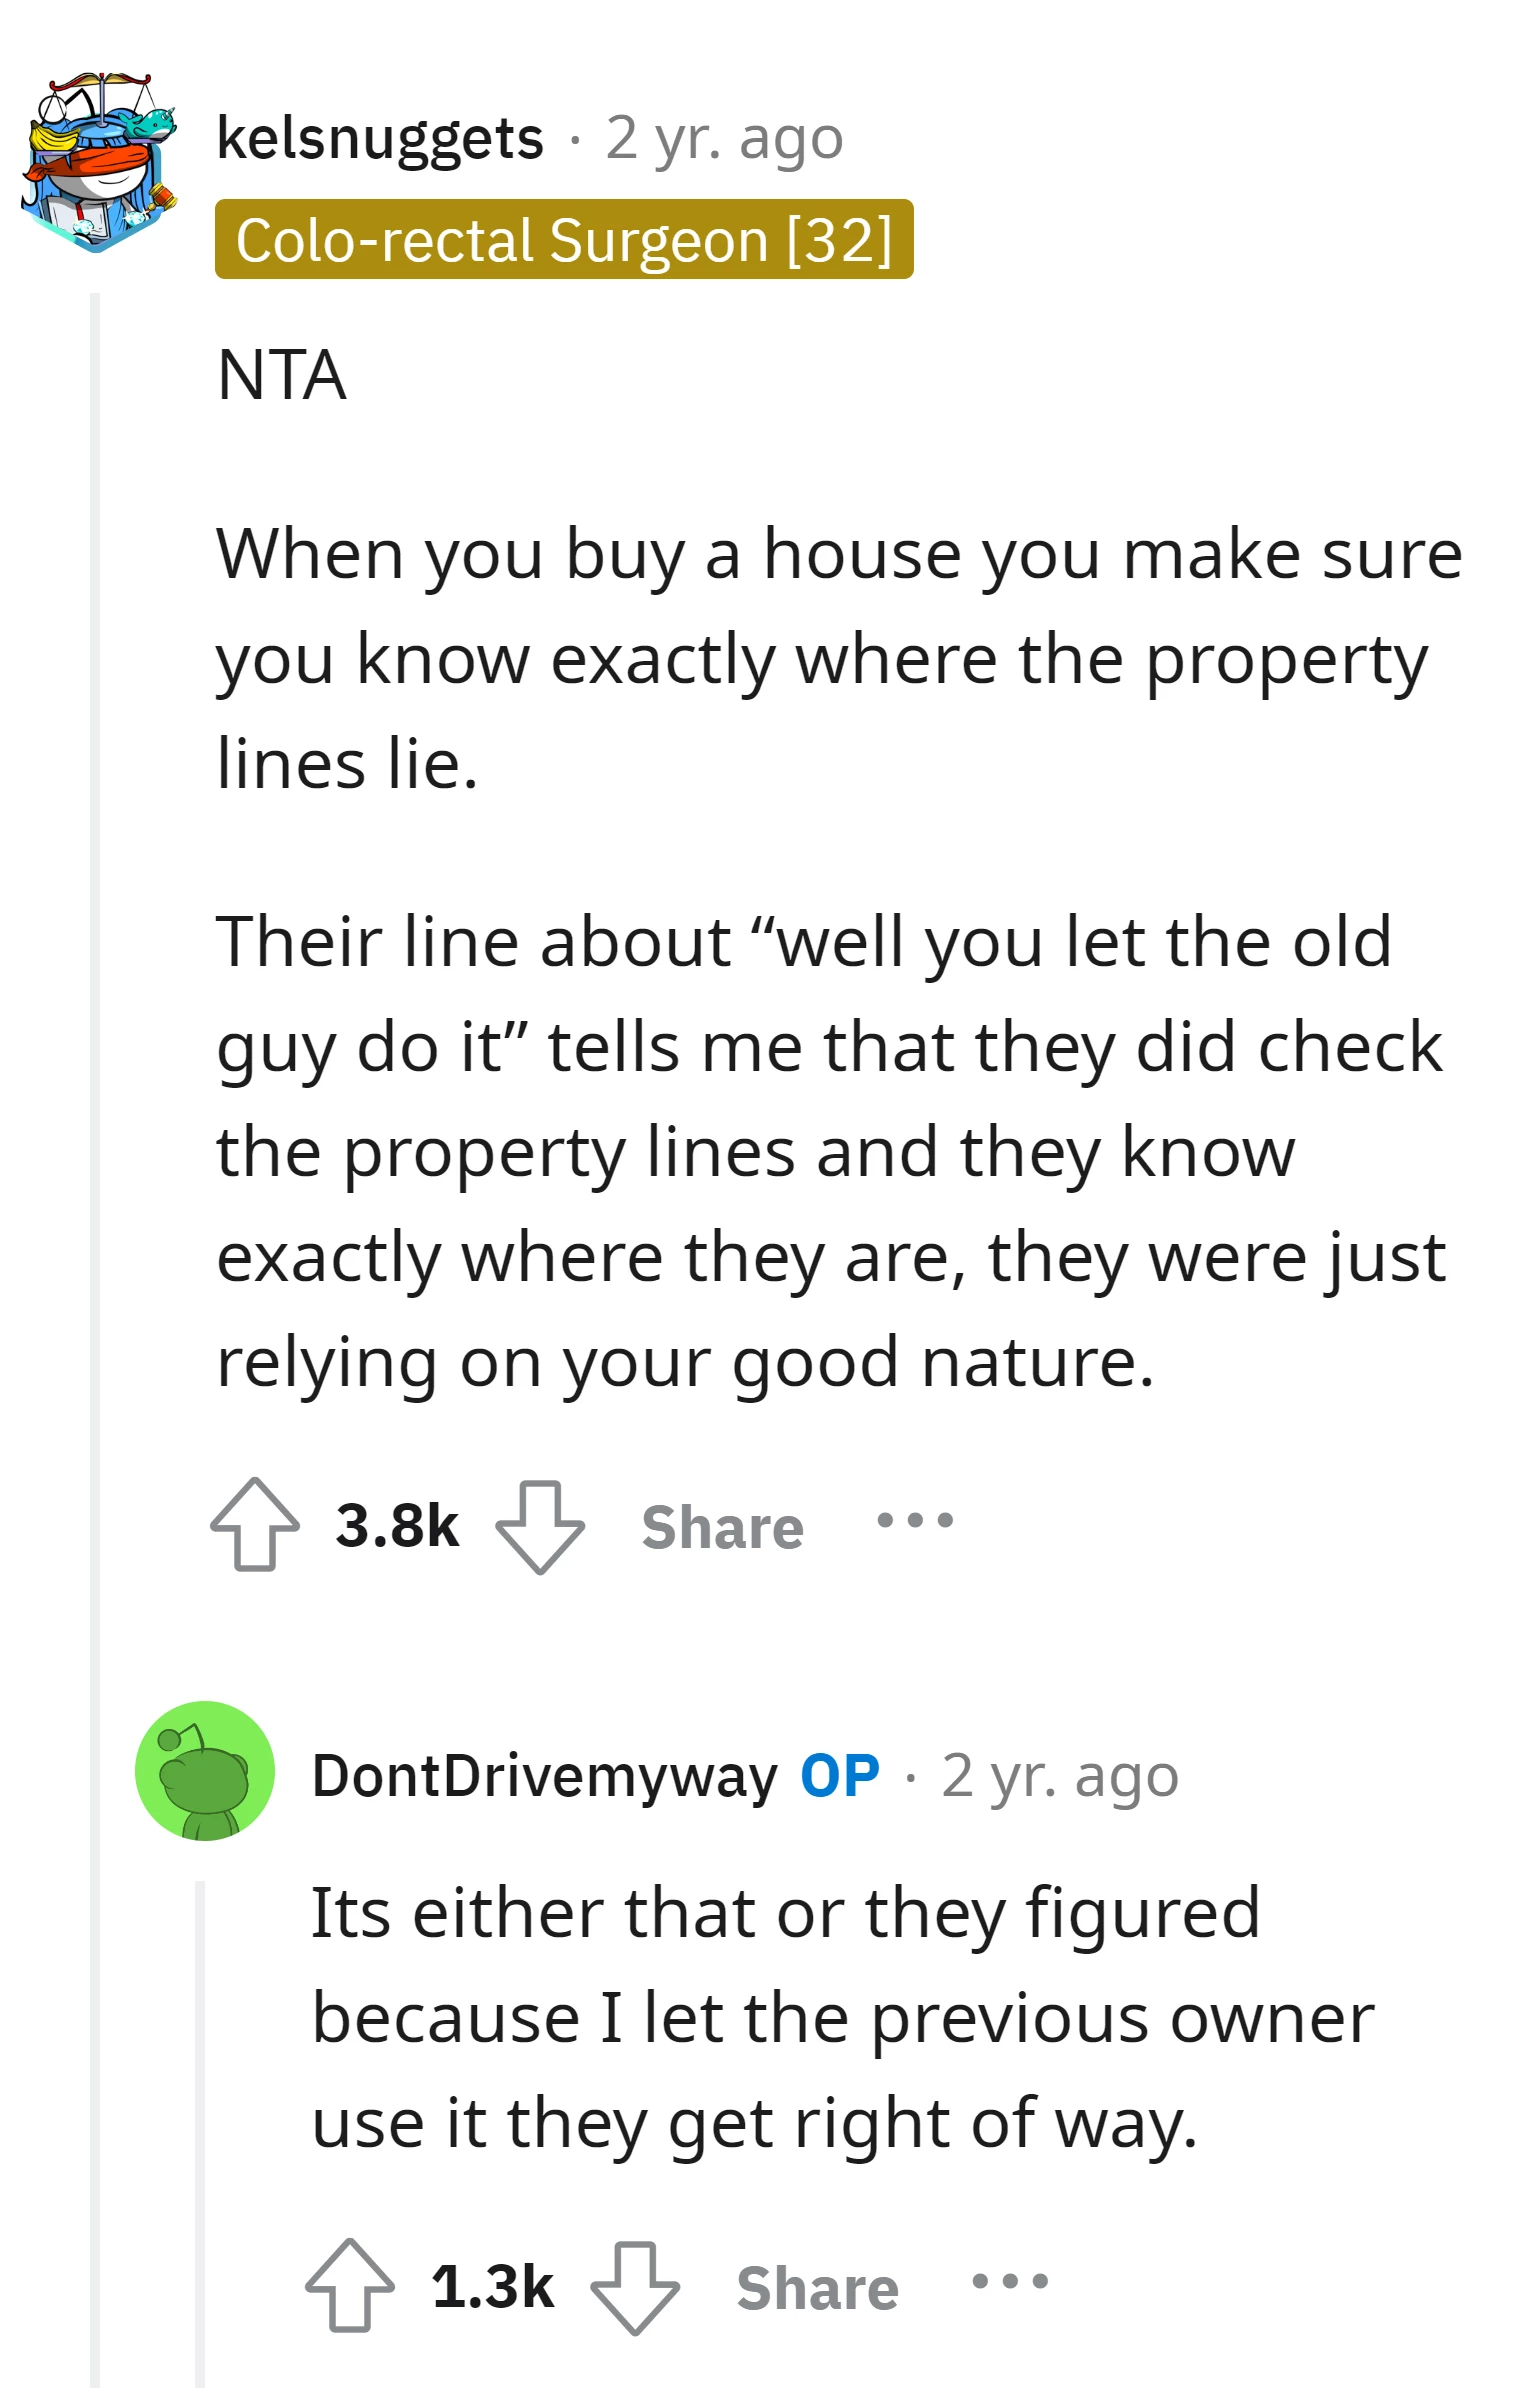 When buying a house, it's crucial to know property lines